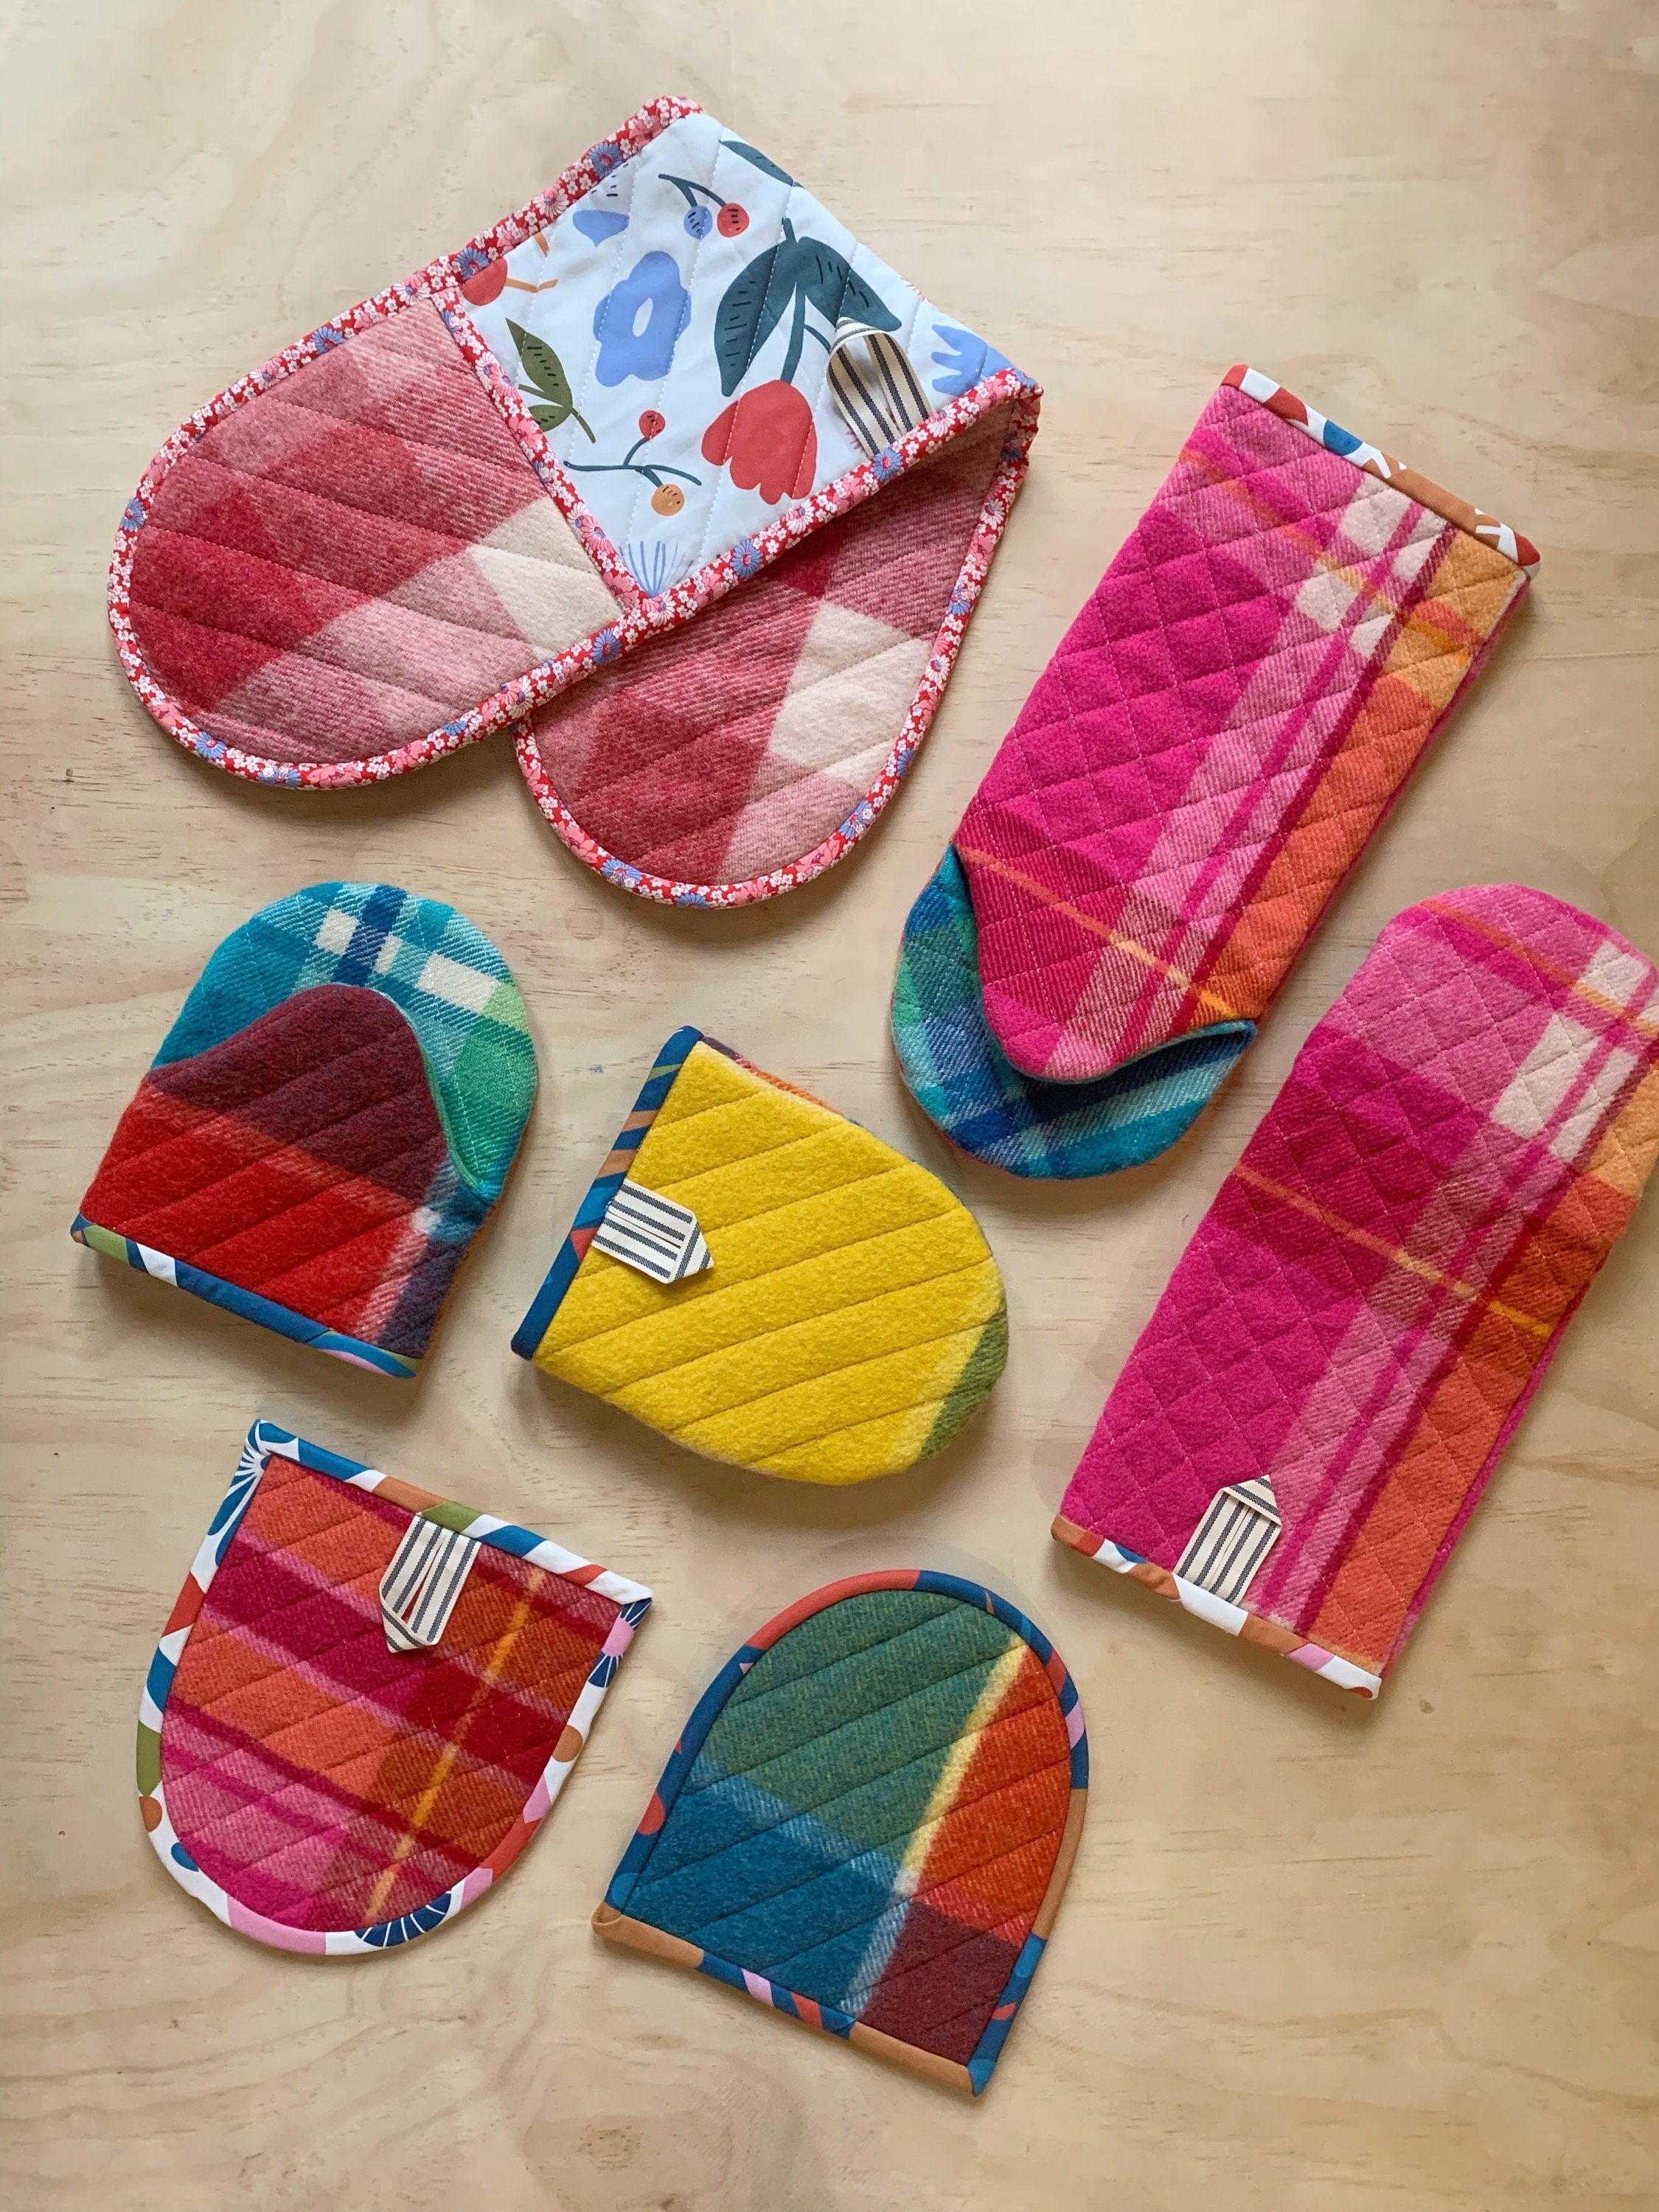 15 Sewing Patterns for Potholders & Oven Mitts (8 Free!)